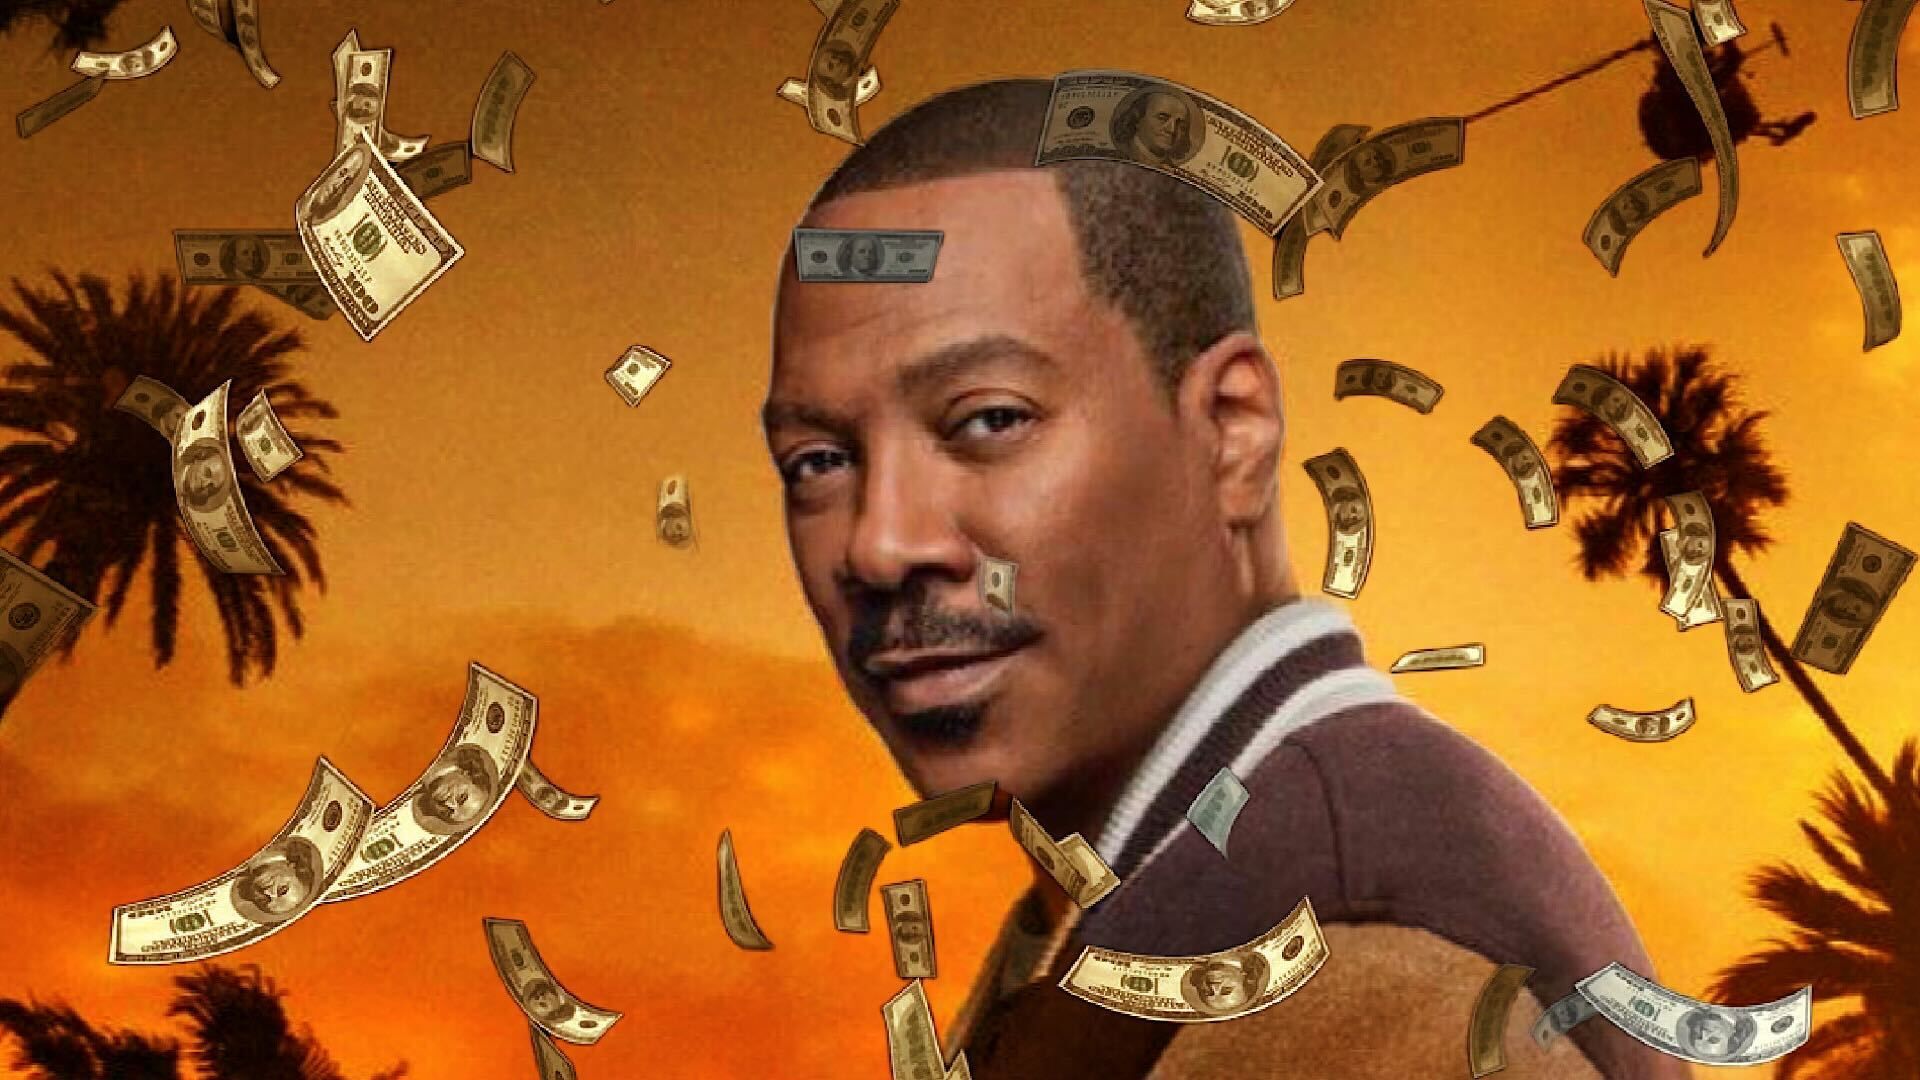 Eddie Murphy as Axel Foley in Beverly Hills Cop 4 with bank notes